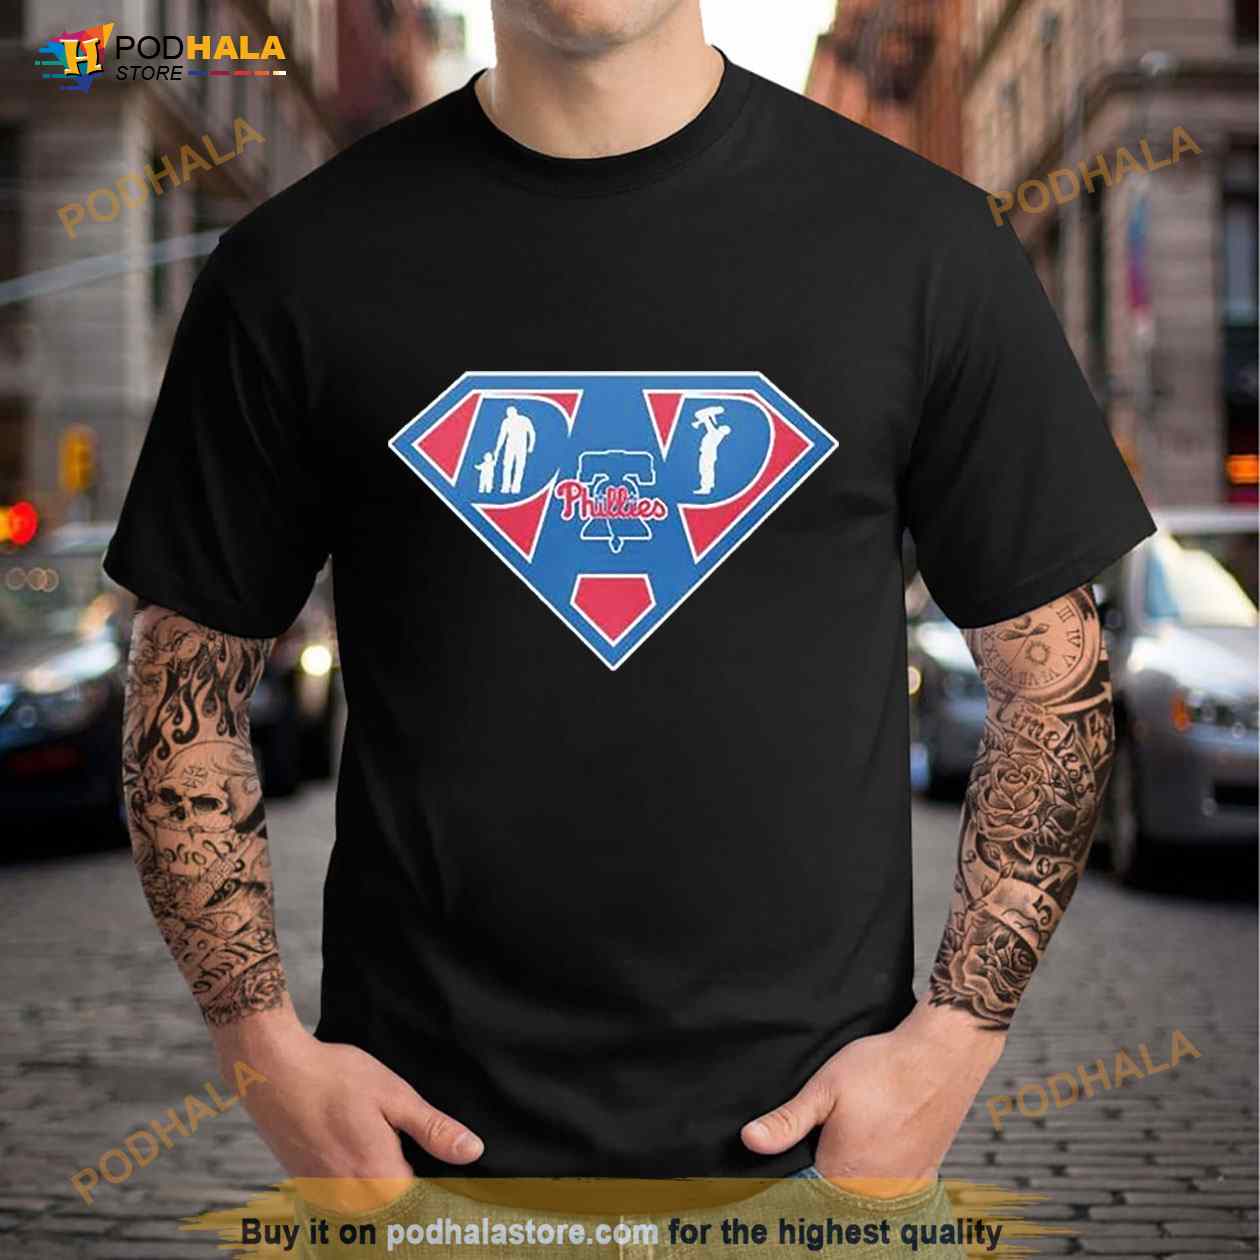 Philadelphia Phillies Super Dad Shirt - Bring Your Ideas, Thoughts